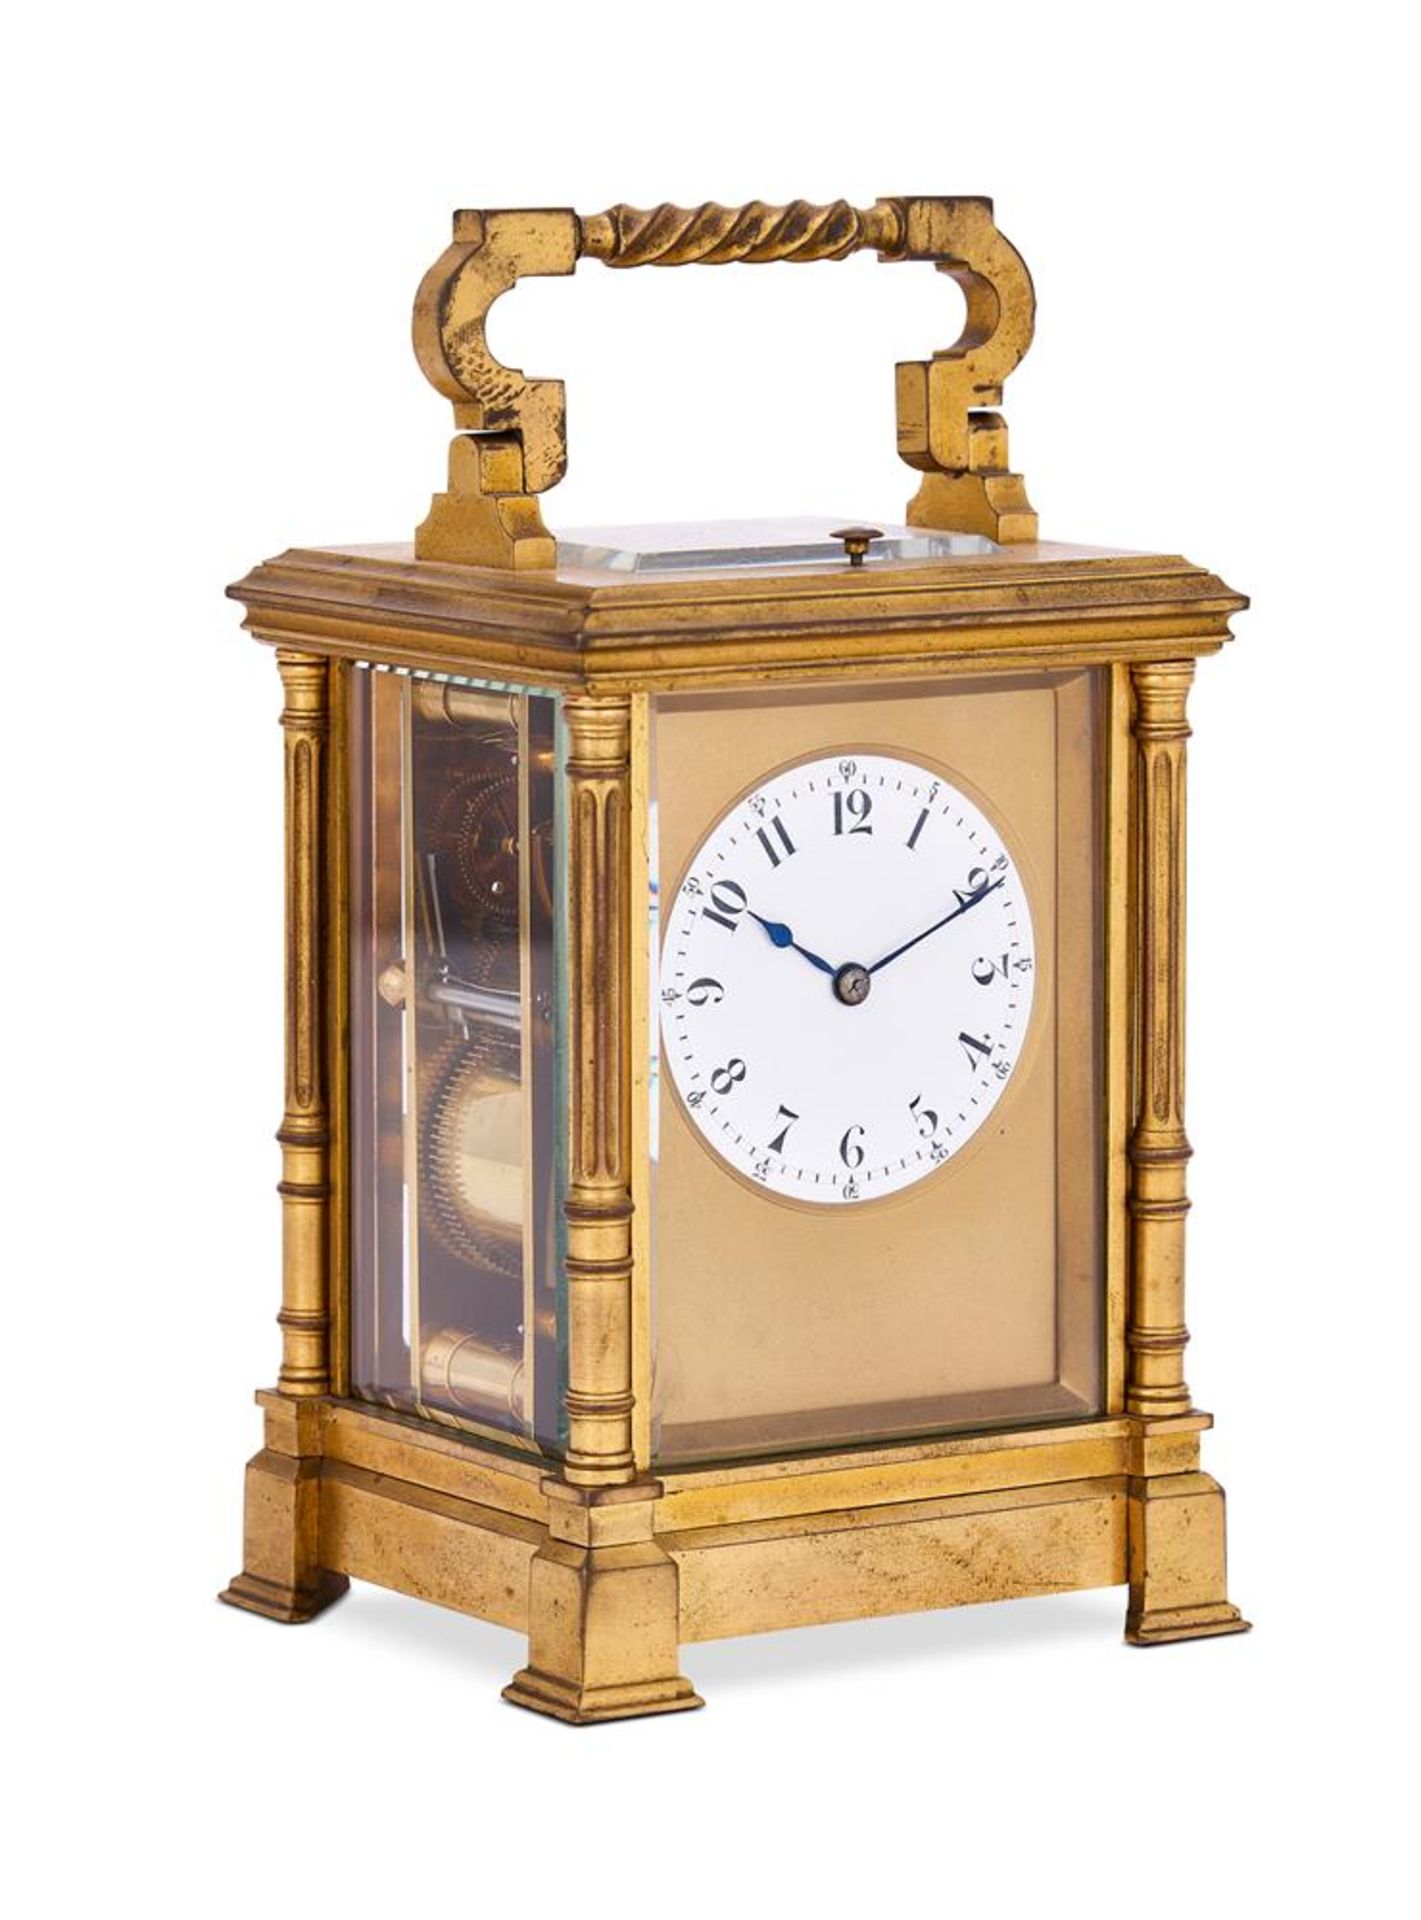 A FRENCH LACQUERED-BRASS CARRIAGE CLOCK LATE 19TH CENTURY - Image 2 of 2